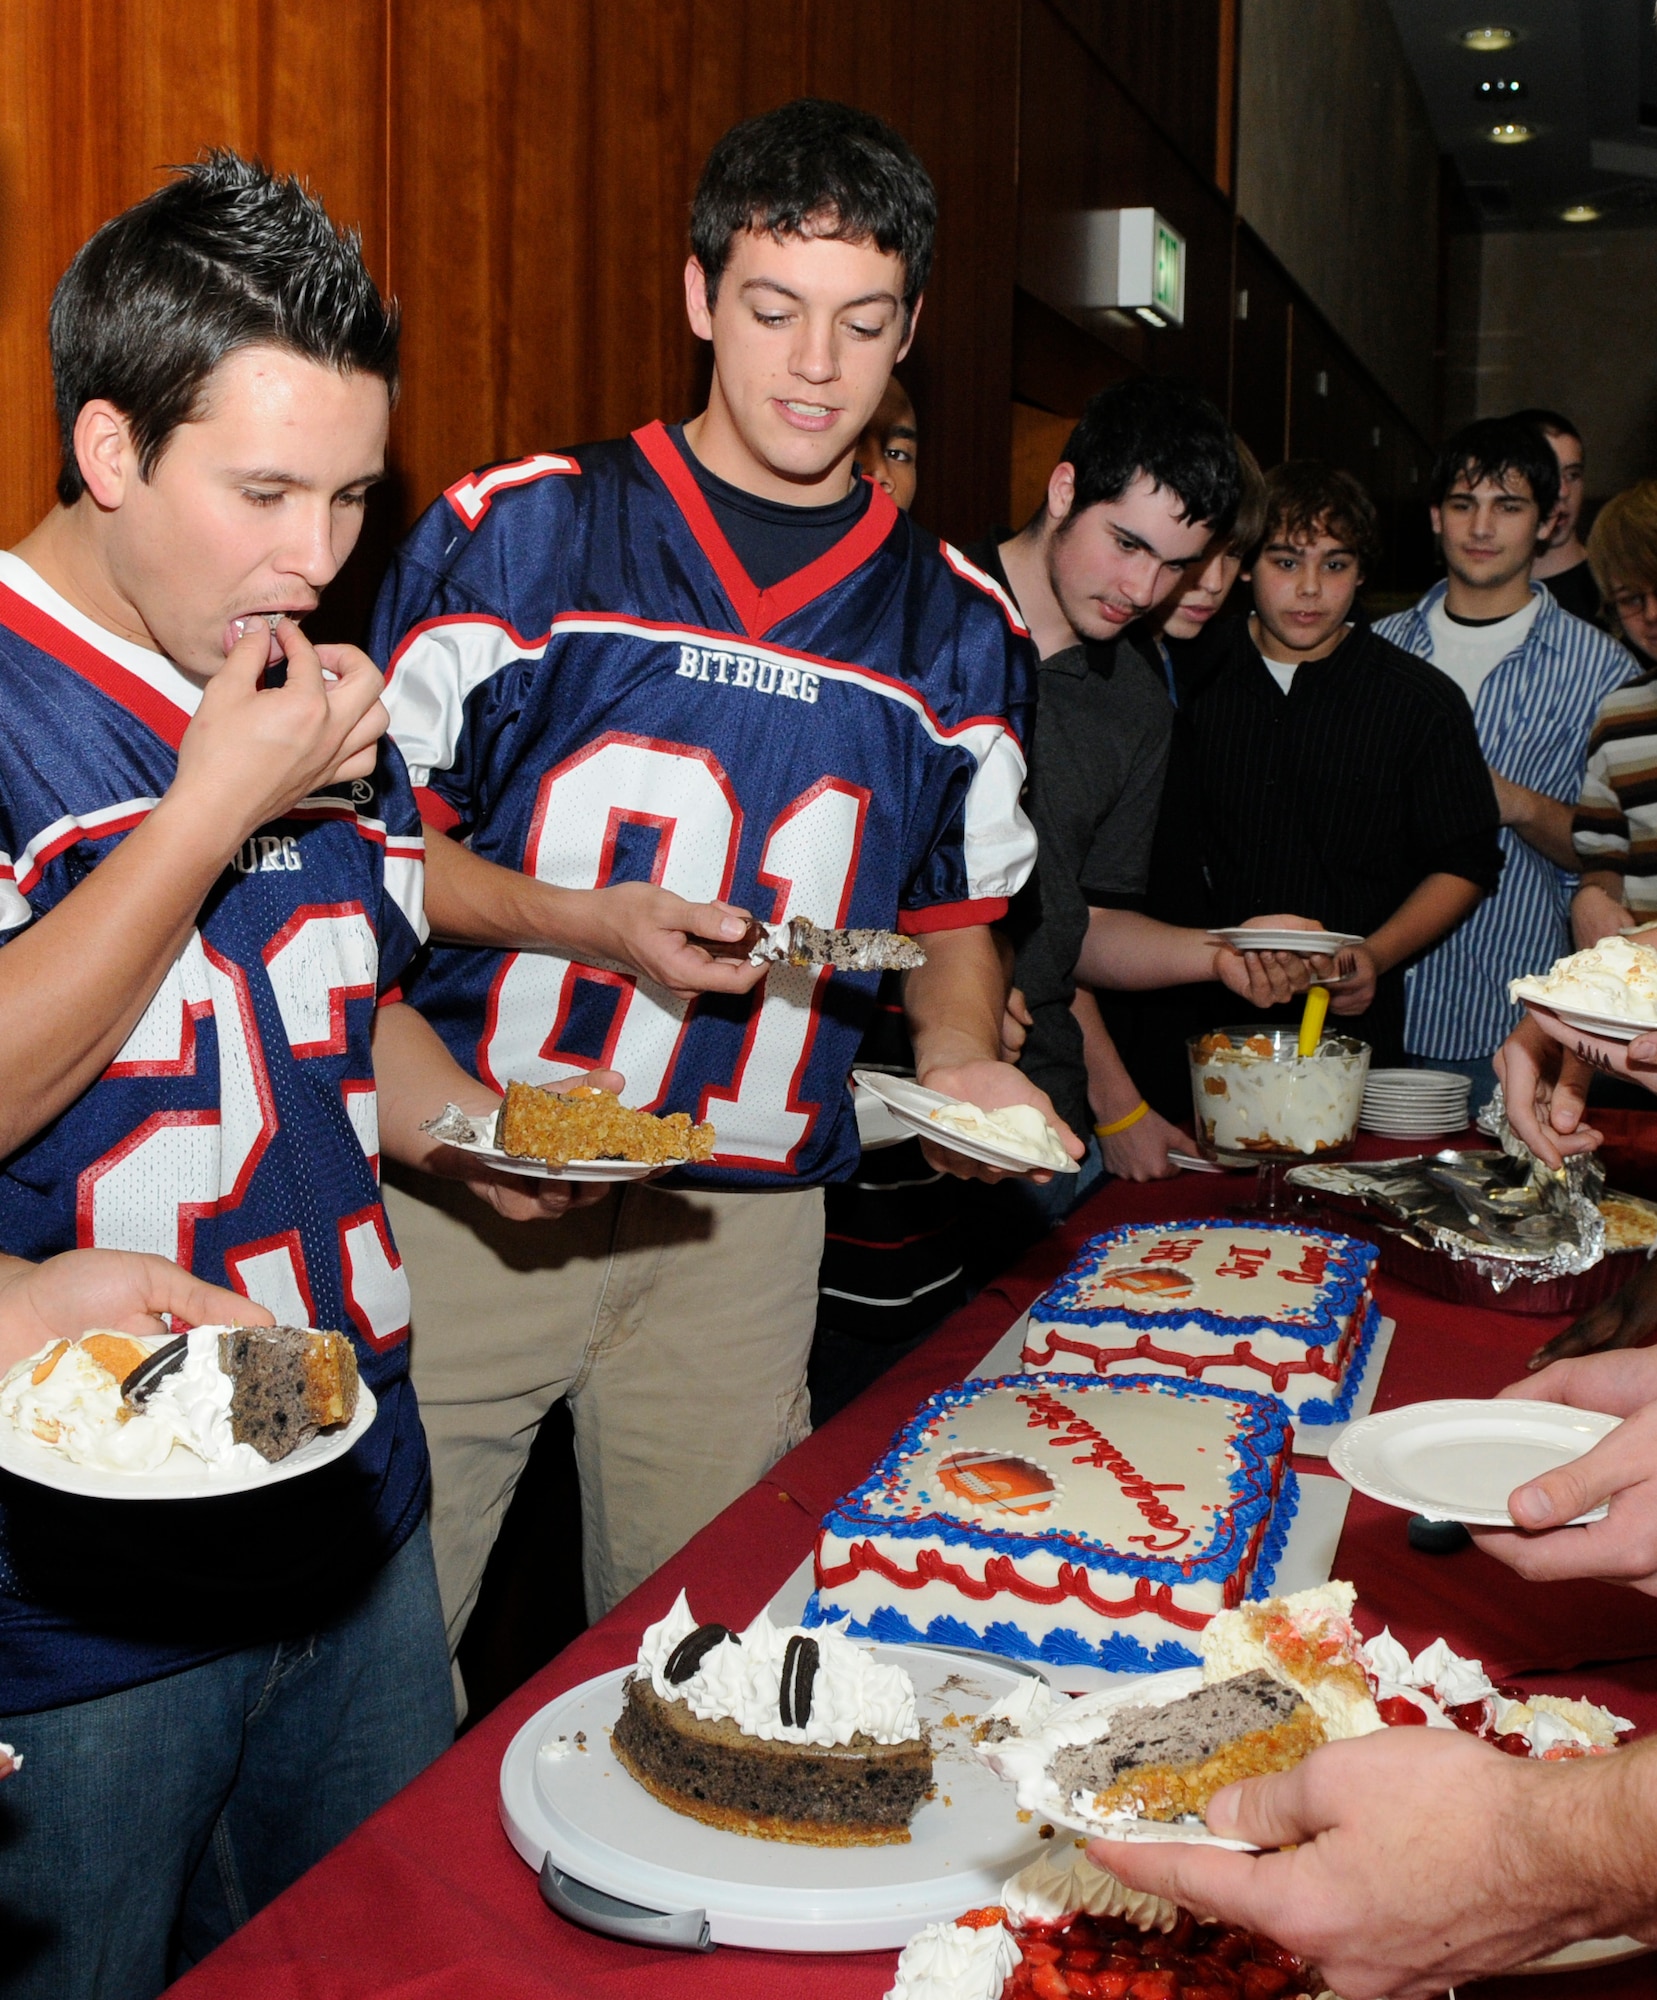 SPANGDAHLEM AIR BASE, Germany – Bitburg Barons players, along with friends and family, gather around the dessert table during a celebration dinner at Club Eifel Nov. 10. The Bitburg Barons won the Department of Defense Dependents Schools-Europe Division II football championship game against the Ansbach Cougars Nov. 7. The Bitburg Barons defeated the Cougars 19-6 and ended the Cougars’ 31-game winning streak to claim the title as Division II champions. (U.S. Air Force photo/Airman 1st Class Staci Miller)